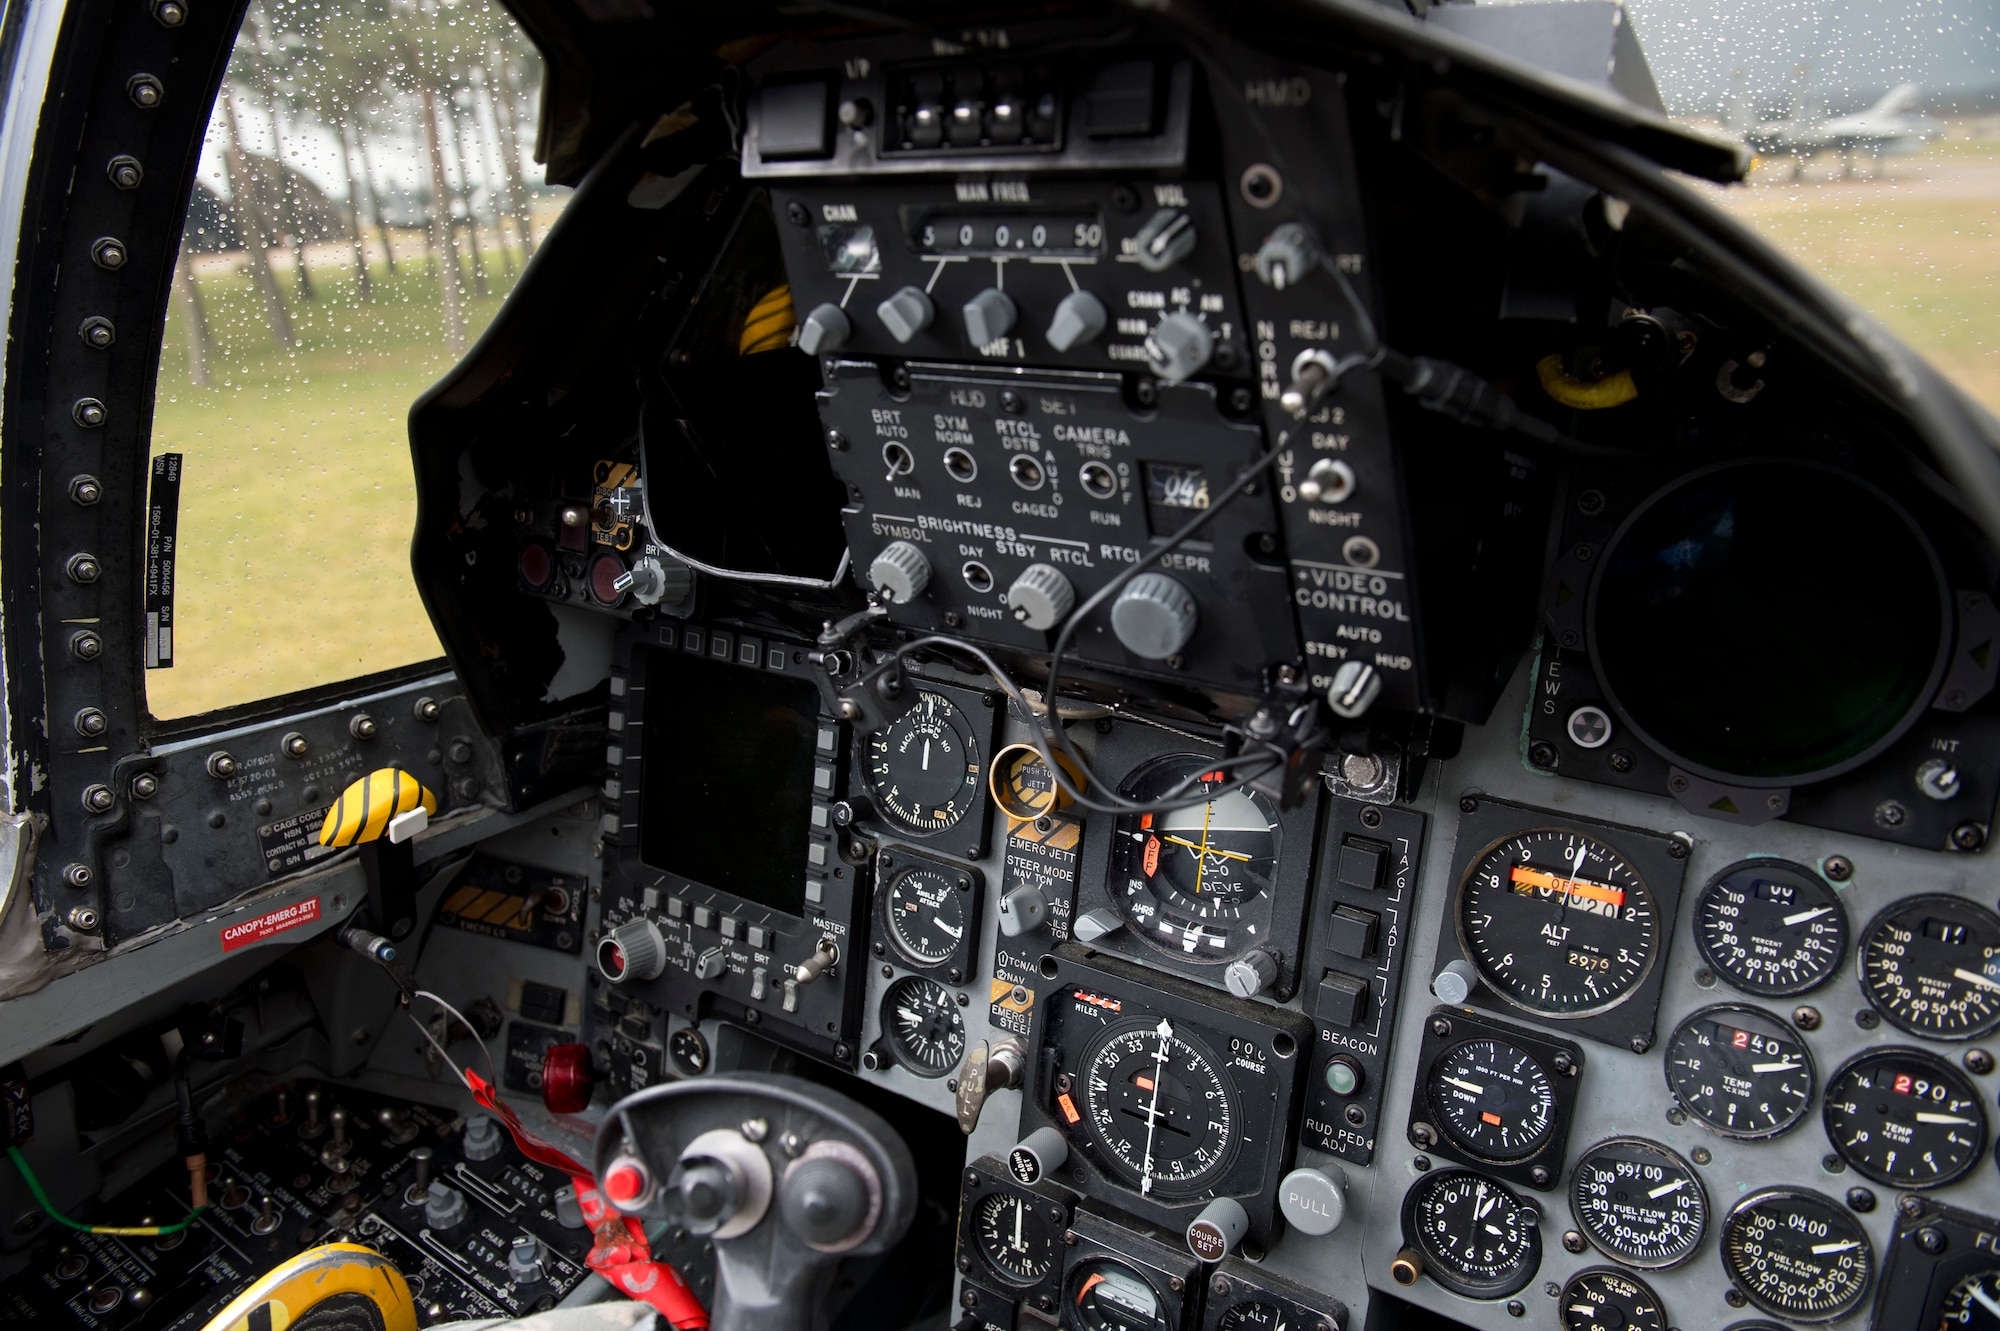 A view of the cockpit of an F-15C Eagle from the 493rd Fighter Squadron as it rests on the runway between sorties at Royal Air Force Lakenheath, March 7, 2016. The 493rd FS maintains the ability to rapidly generate, deploy, and sustain operations to execute wartime and peacetime taskings in any theater of operations in the world. (U.S. Air Force photo/Airman 1st Class Erin R. Babis)